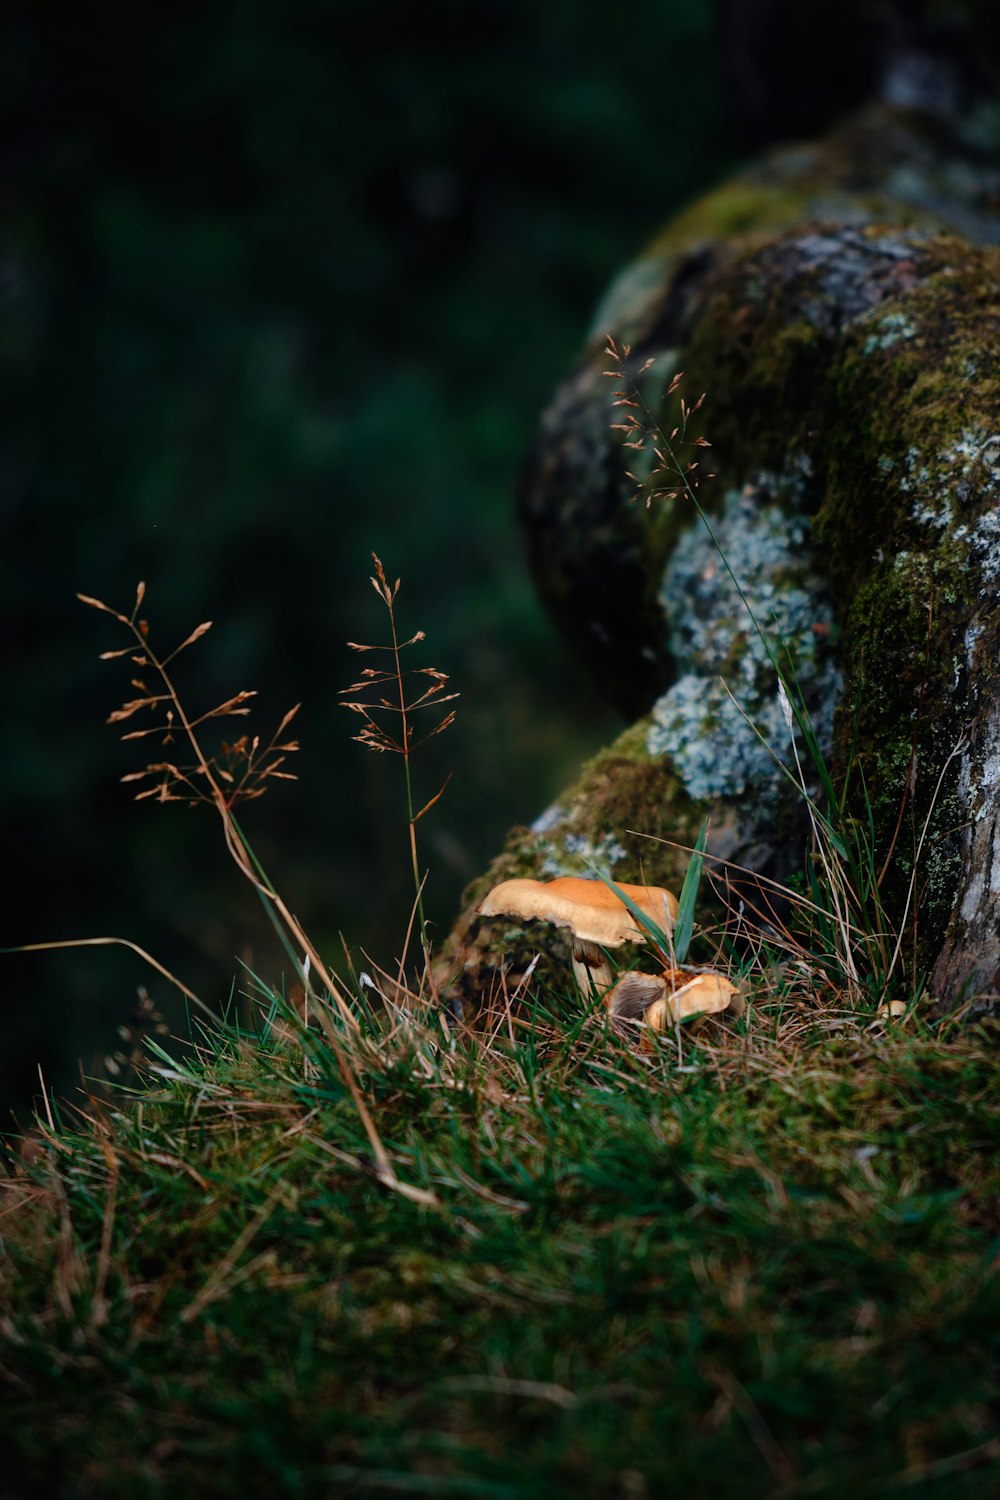 a mossy rock with small mushrooms growing out of it